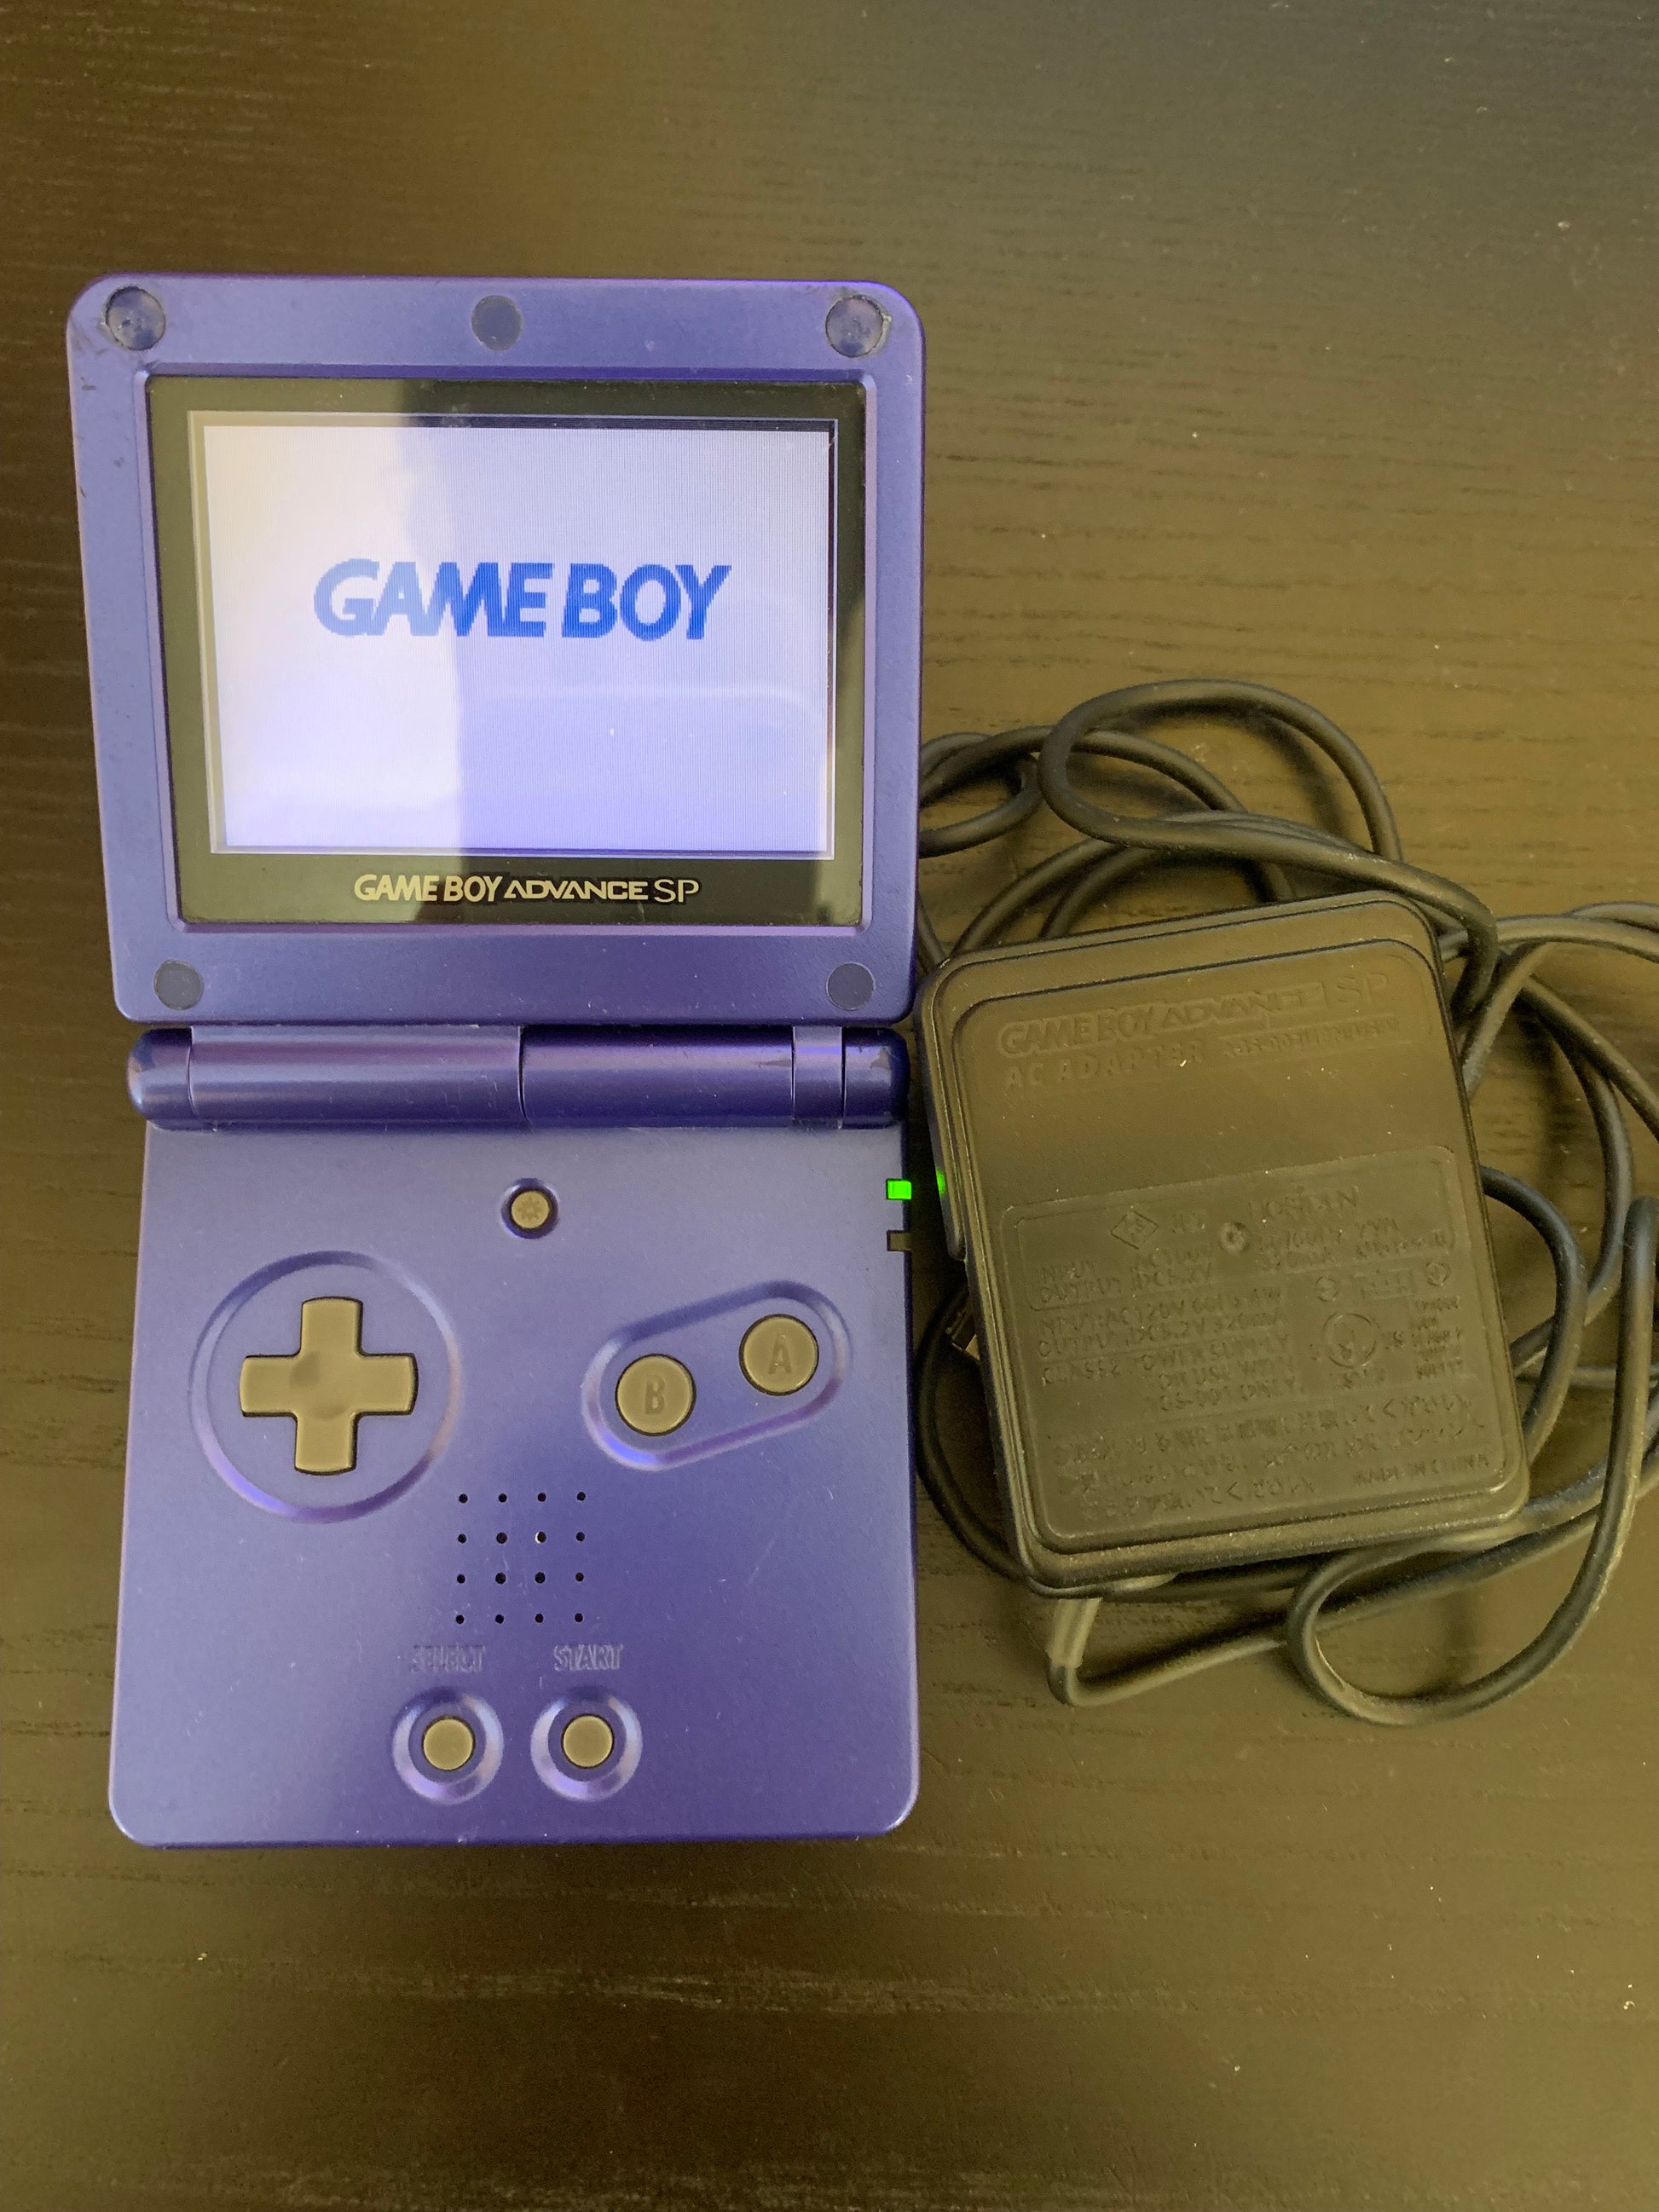 GameBoy Advance SP System Cobalt Blue w/Charger - AGS 001 - Premier Trading Cards